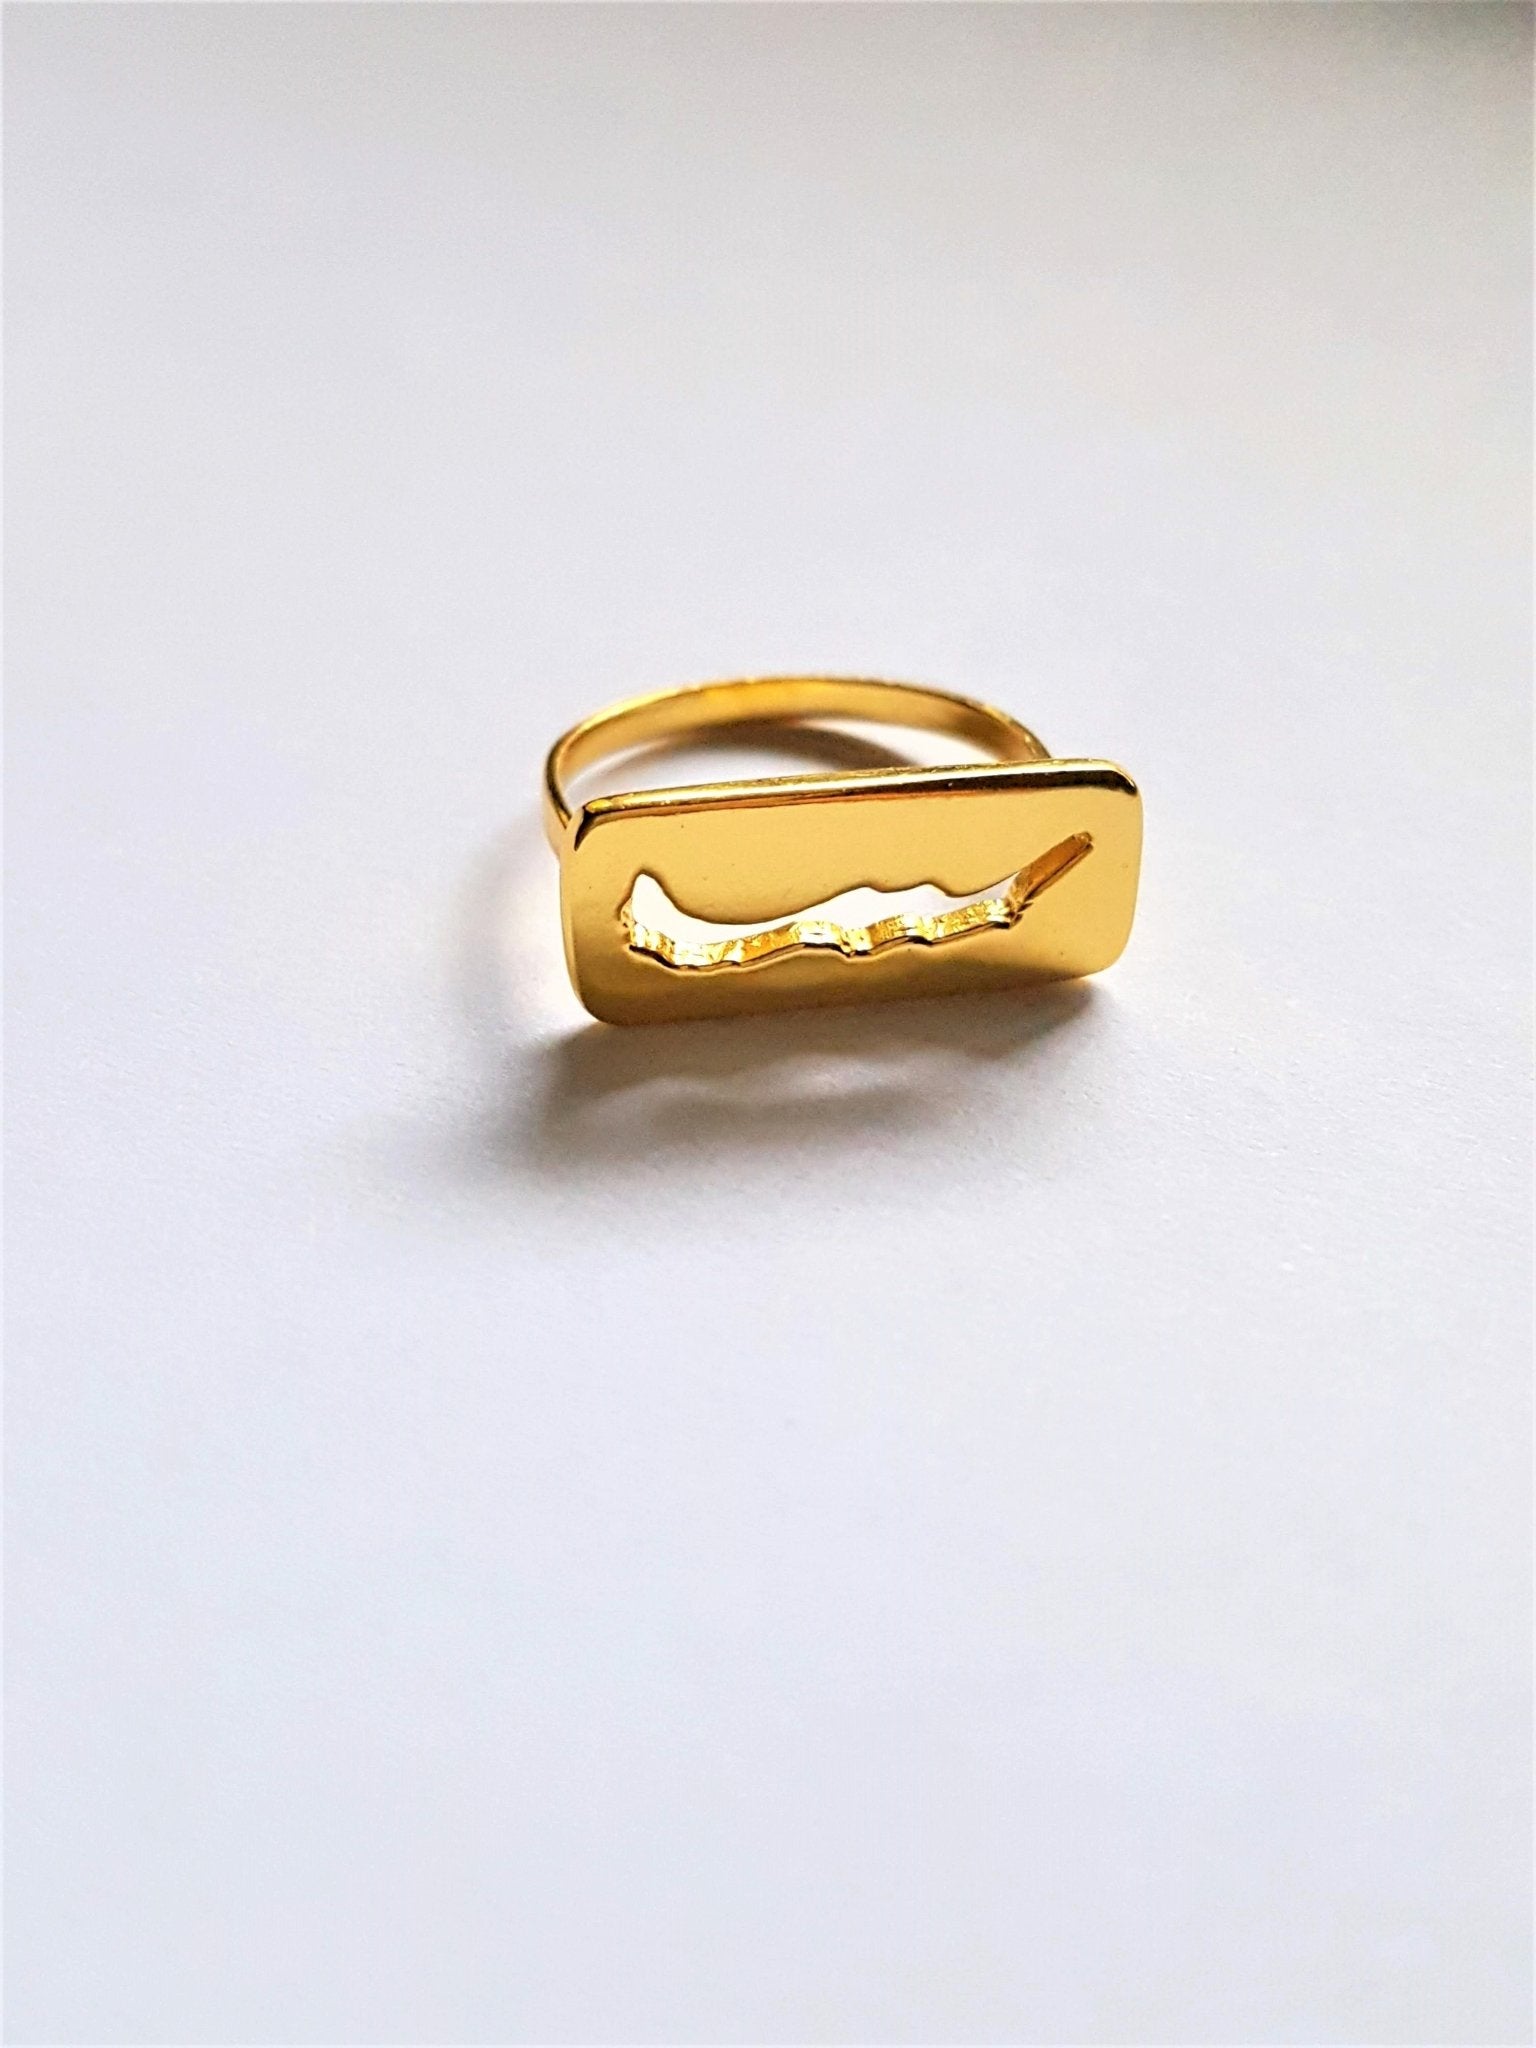 18k plated yellow gold - size 8 Savary island ring with savary island shape cut out of rectangle